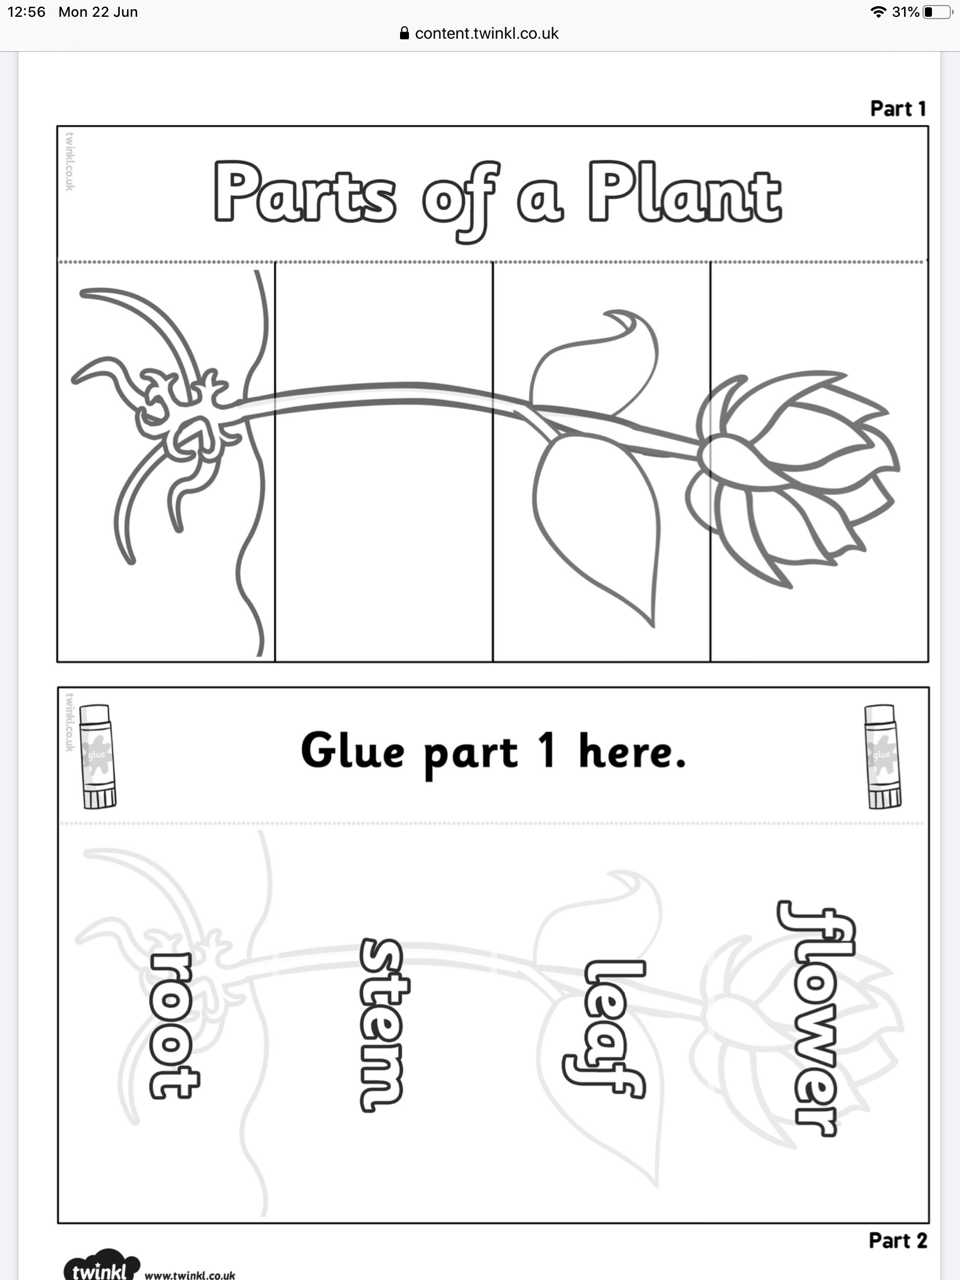 Parts of a Plant (1)